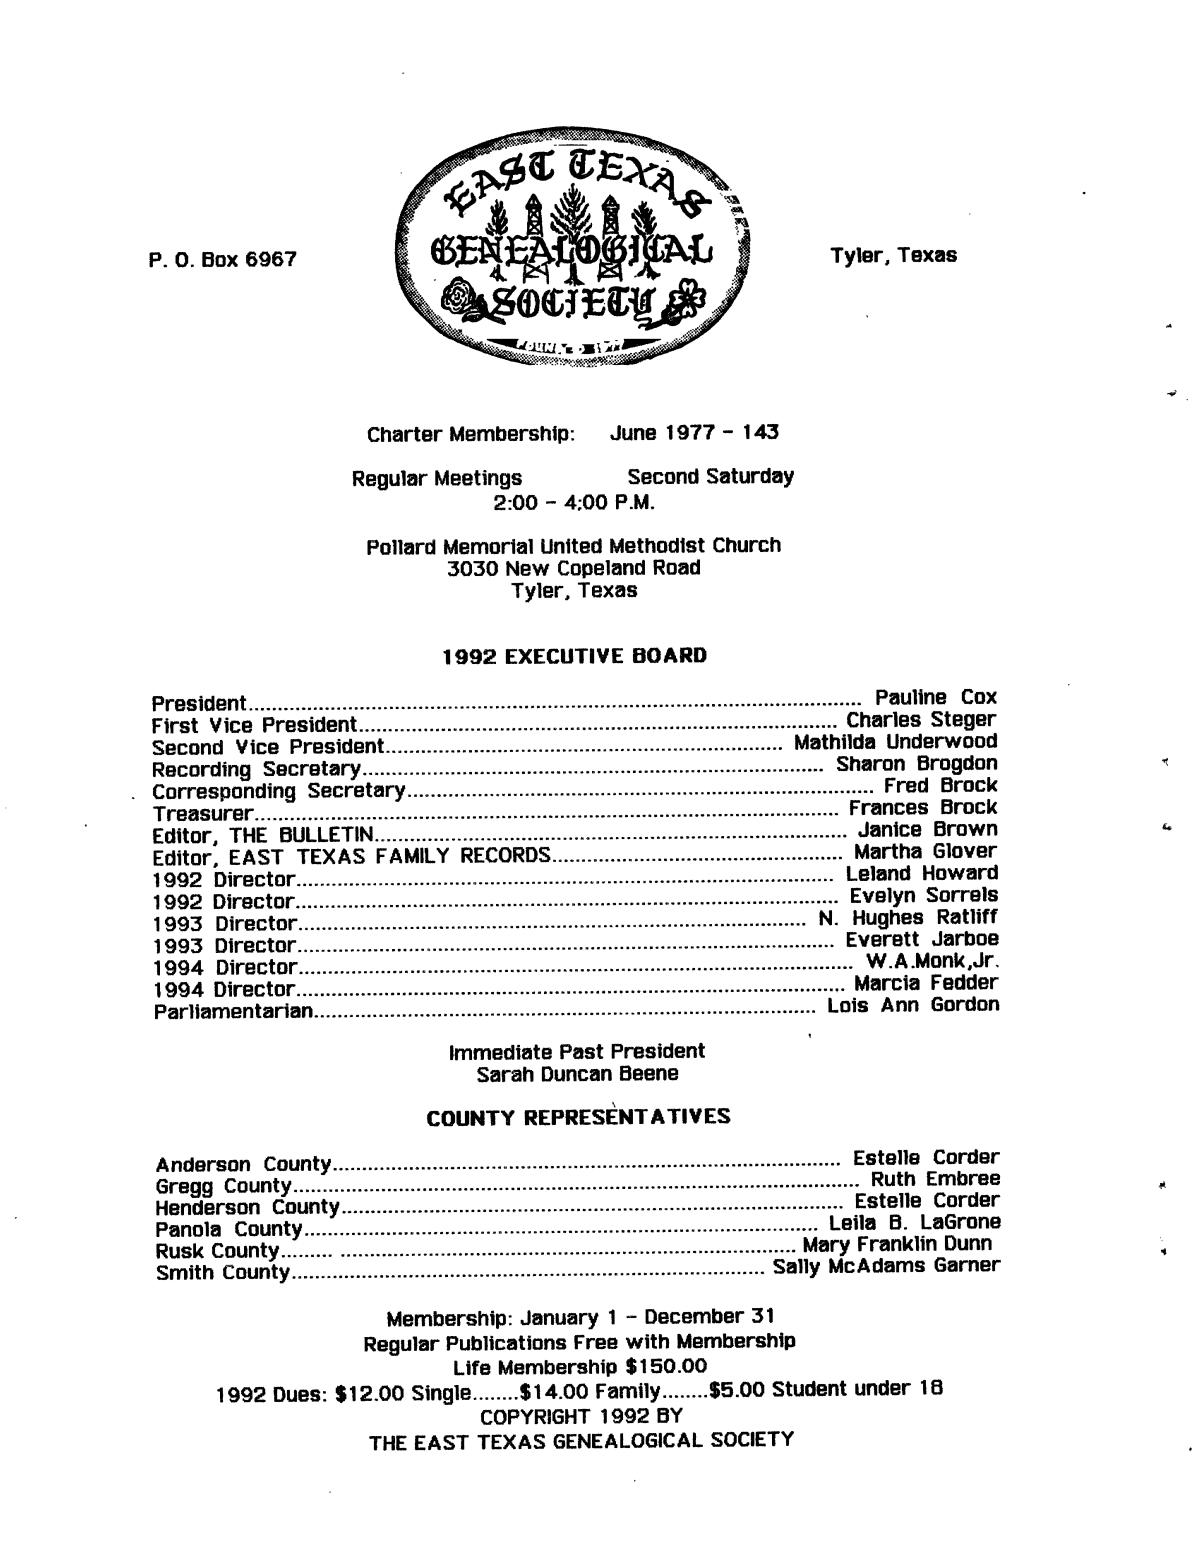 East Texas Family Records, Volume 16, Number 1, Spring 1992
                                                
                                                    None
                                                